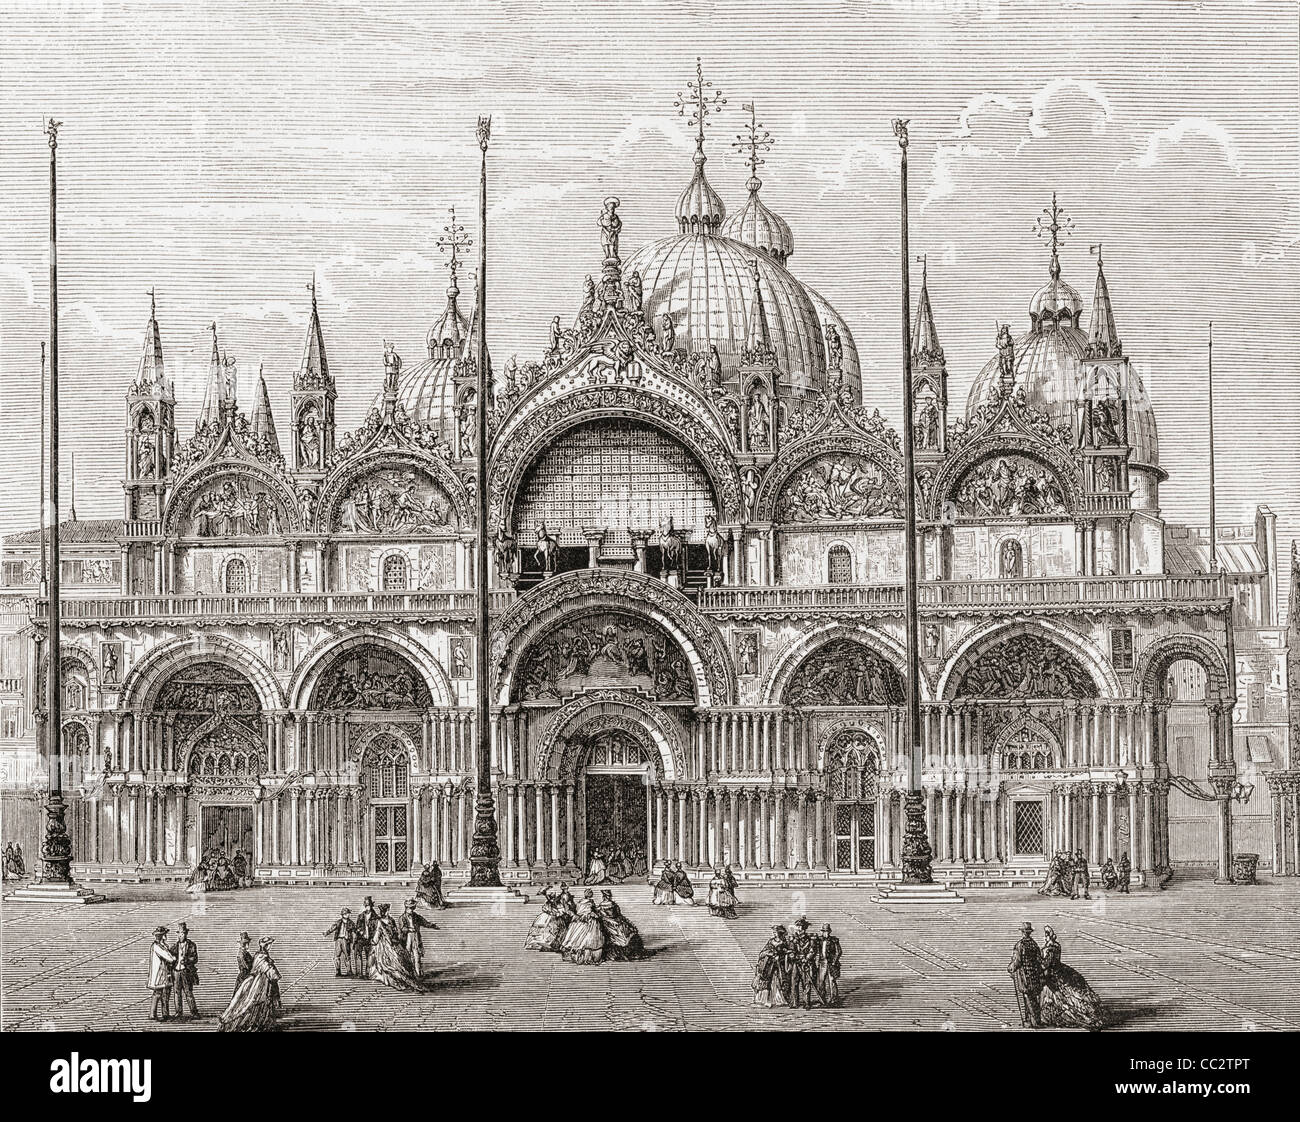 The Patriarchal Cathedral Basilica of Saint Mark, or Saint Mark's Basilica, Venice, Italy in the late 19th century. Stock Photo